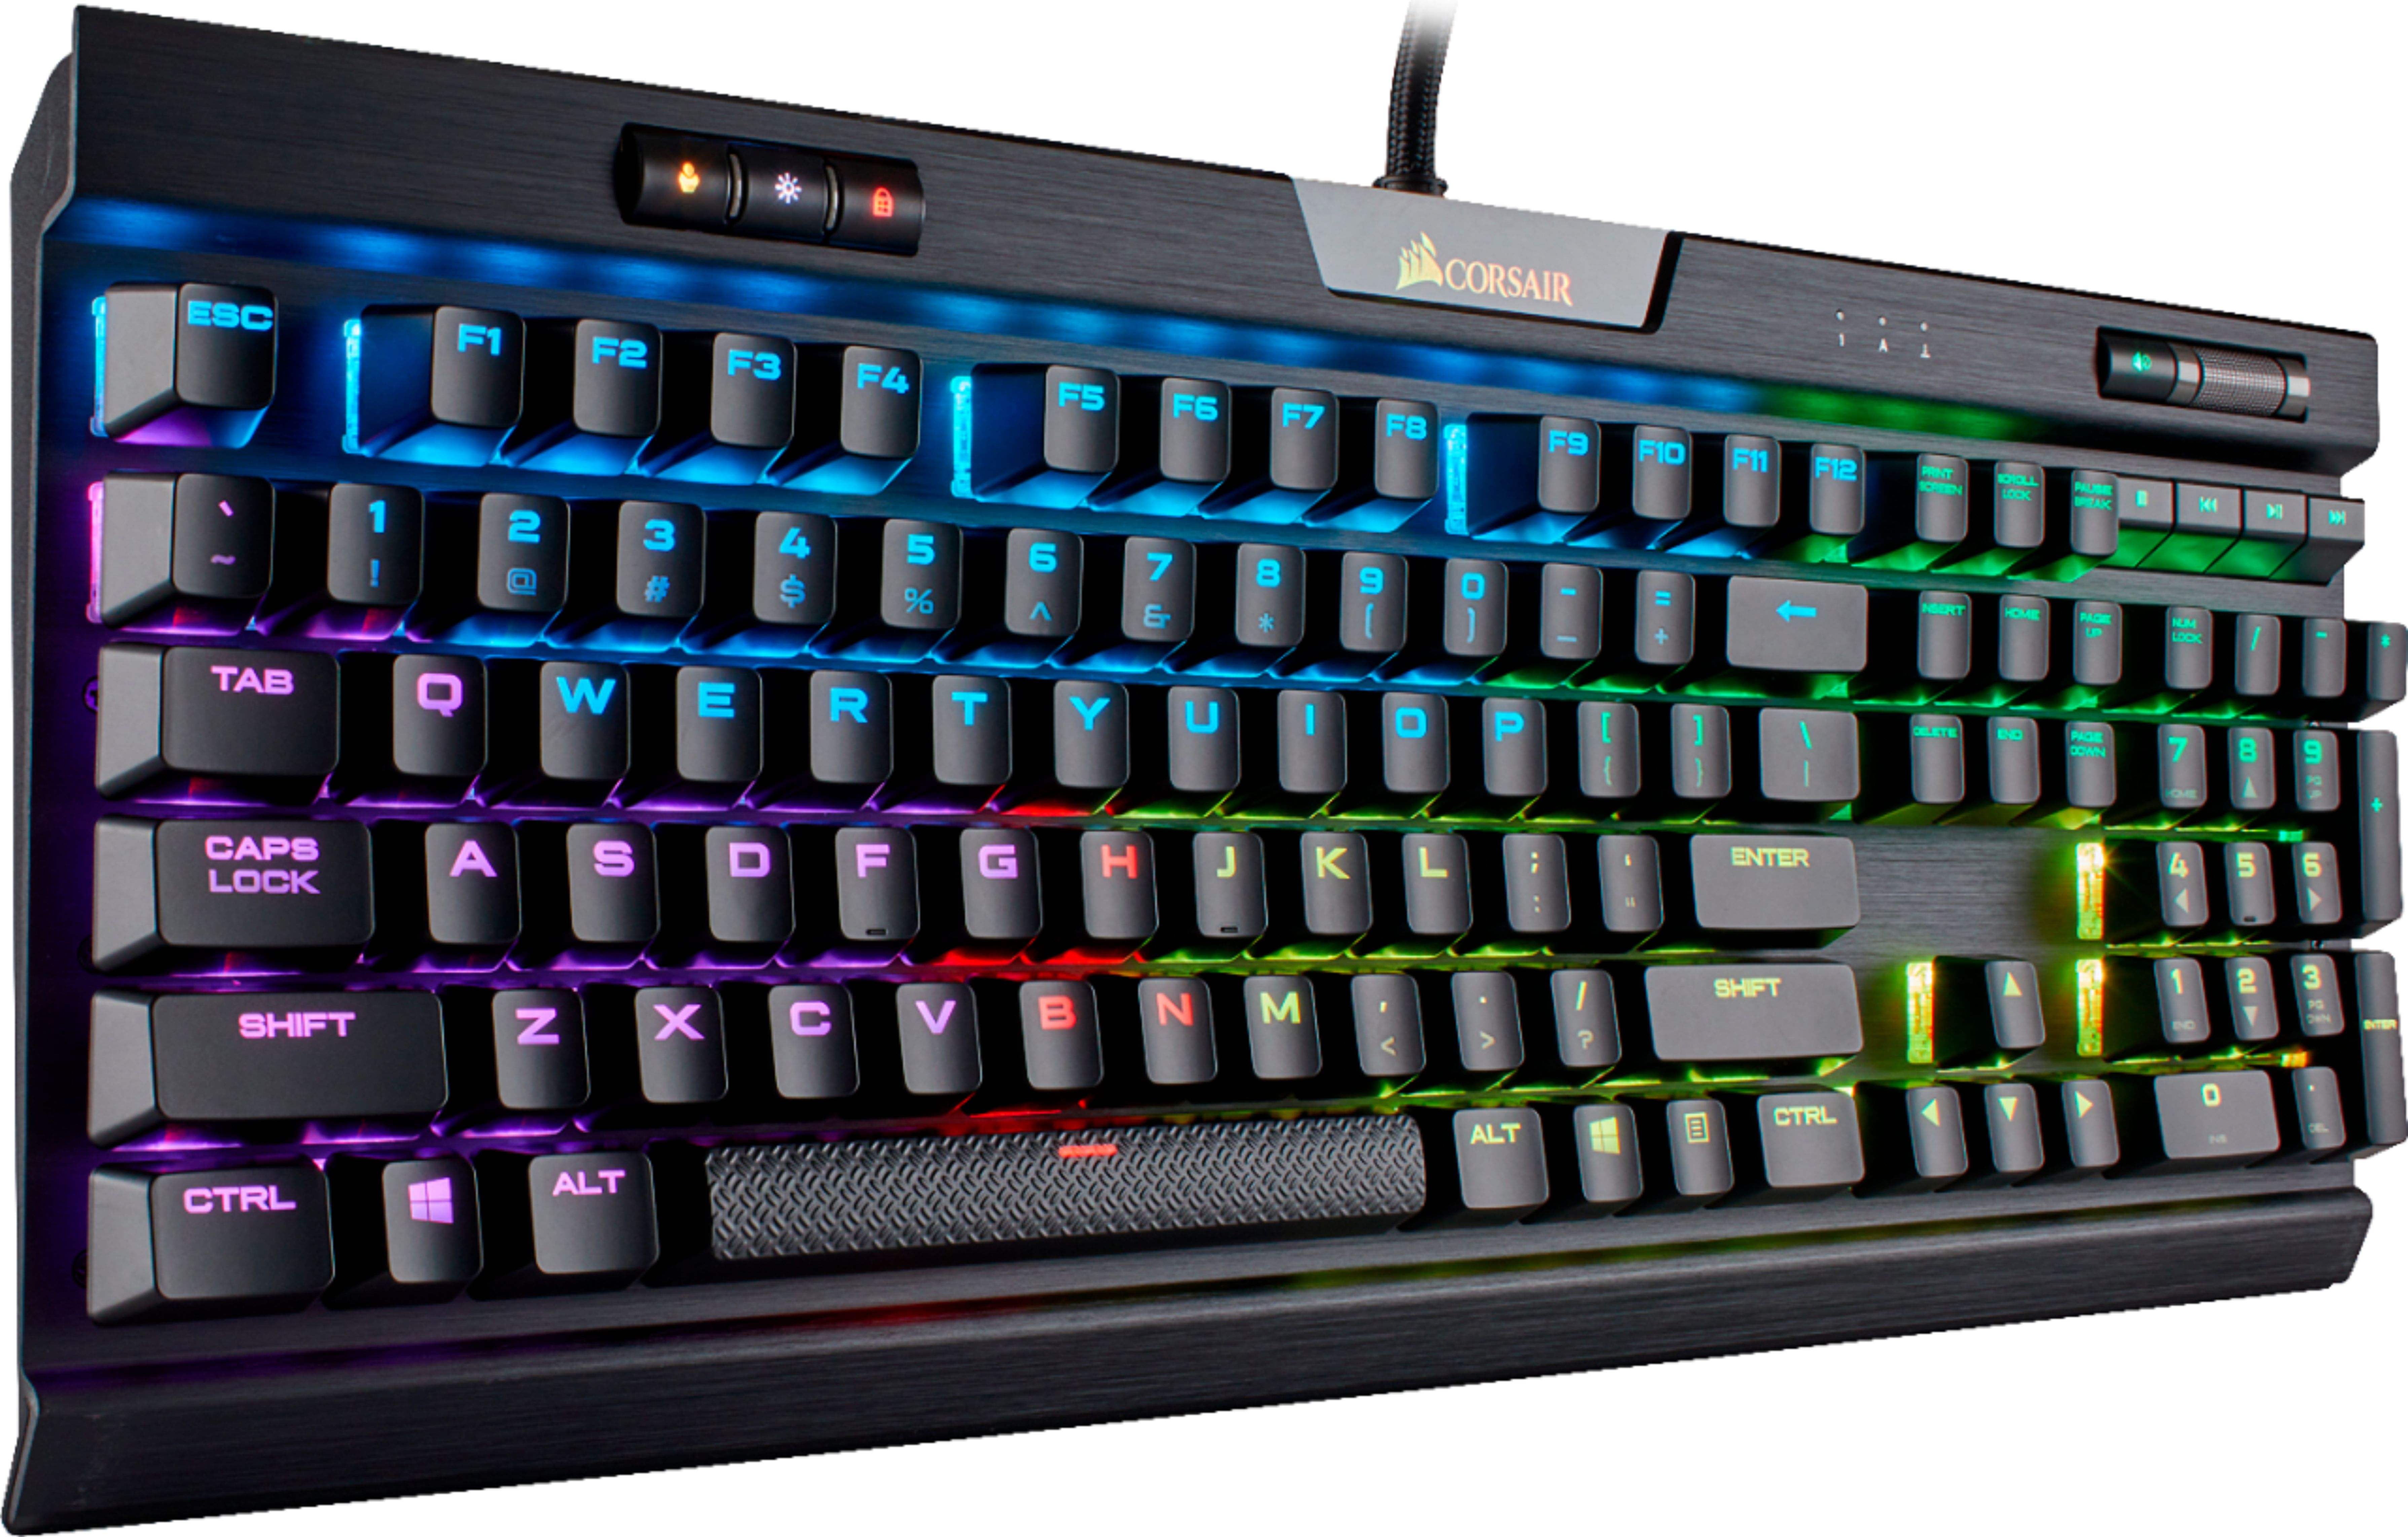 Best Buy: CORSAIR K70 MK. 2 RAPIDFIRE Full-size Cherry MX Speed Linear Switch Gaming Keyboard with USB Pass Through CH-9109014-NA